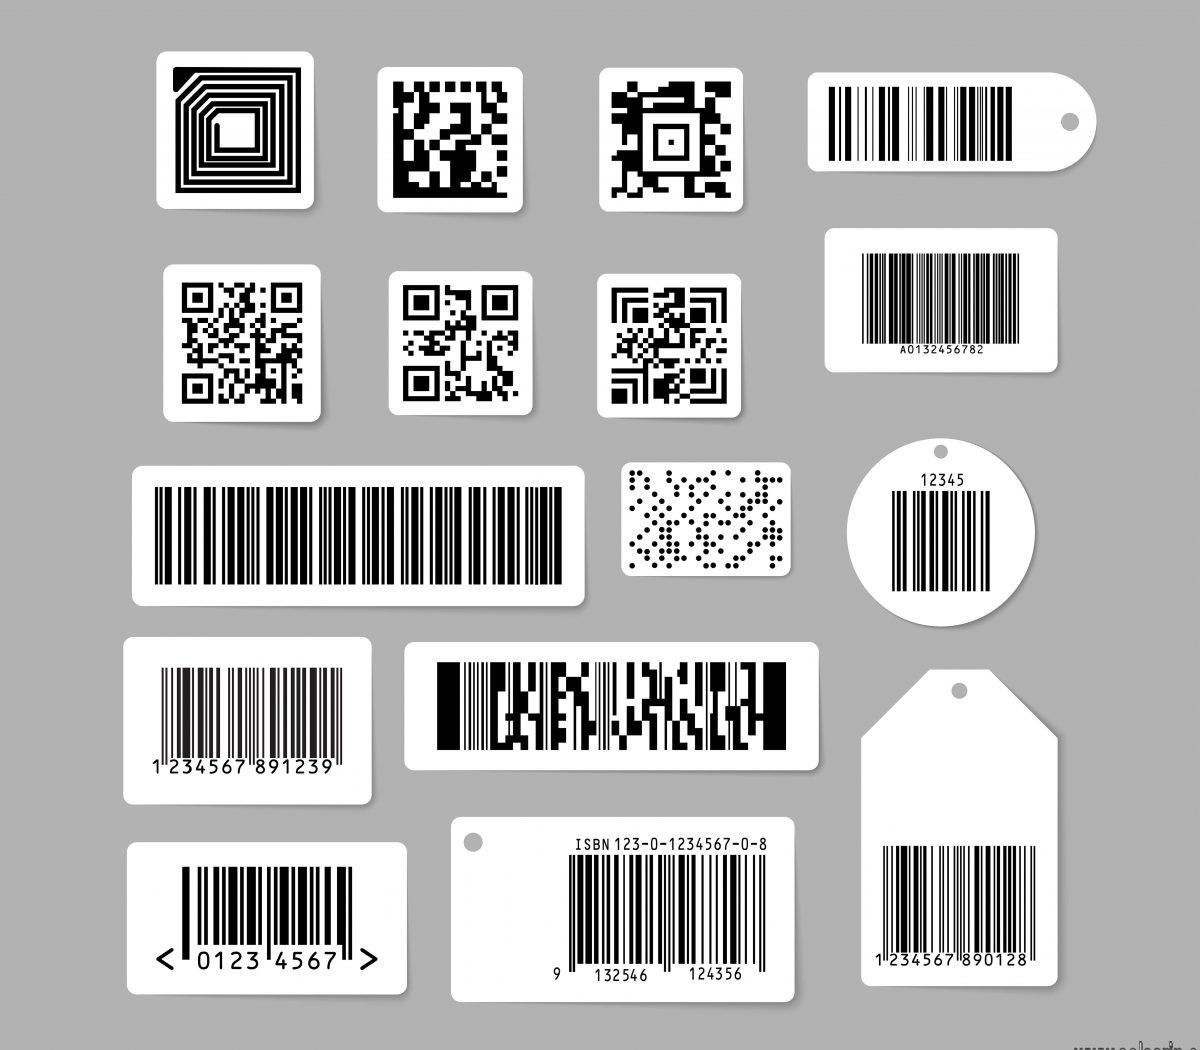 barcode one word or two